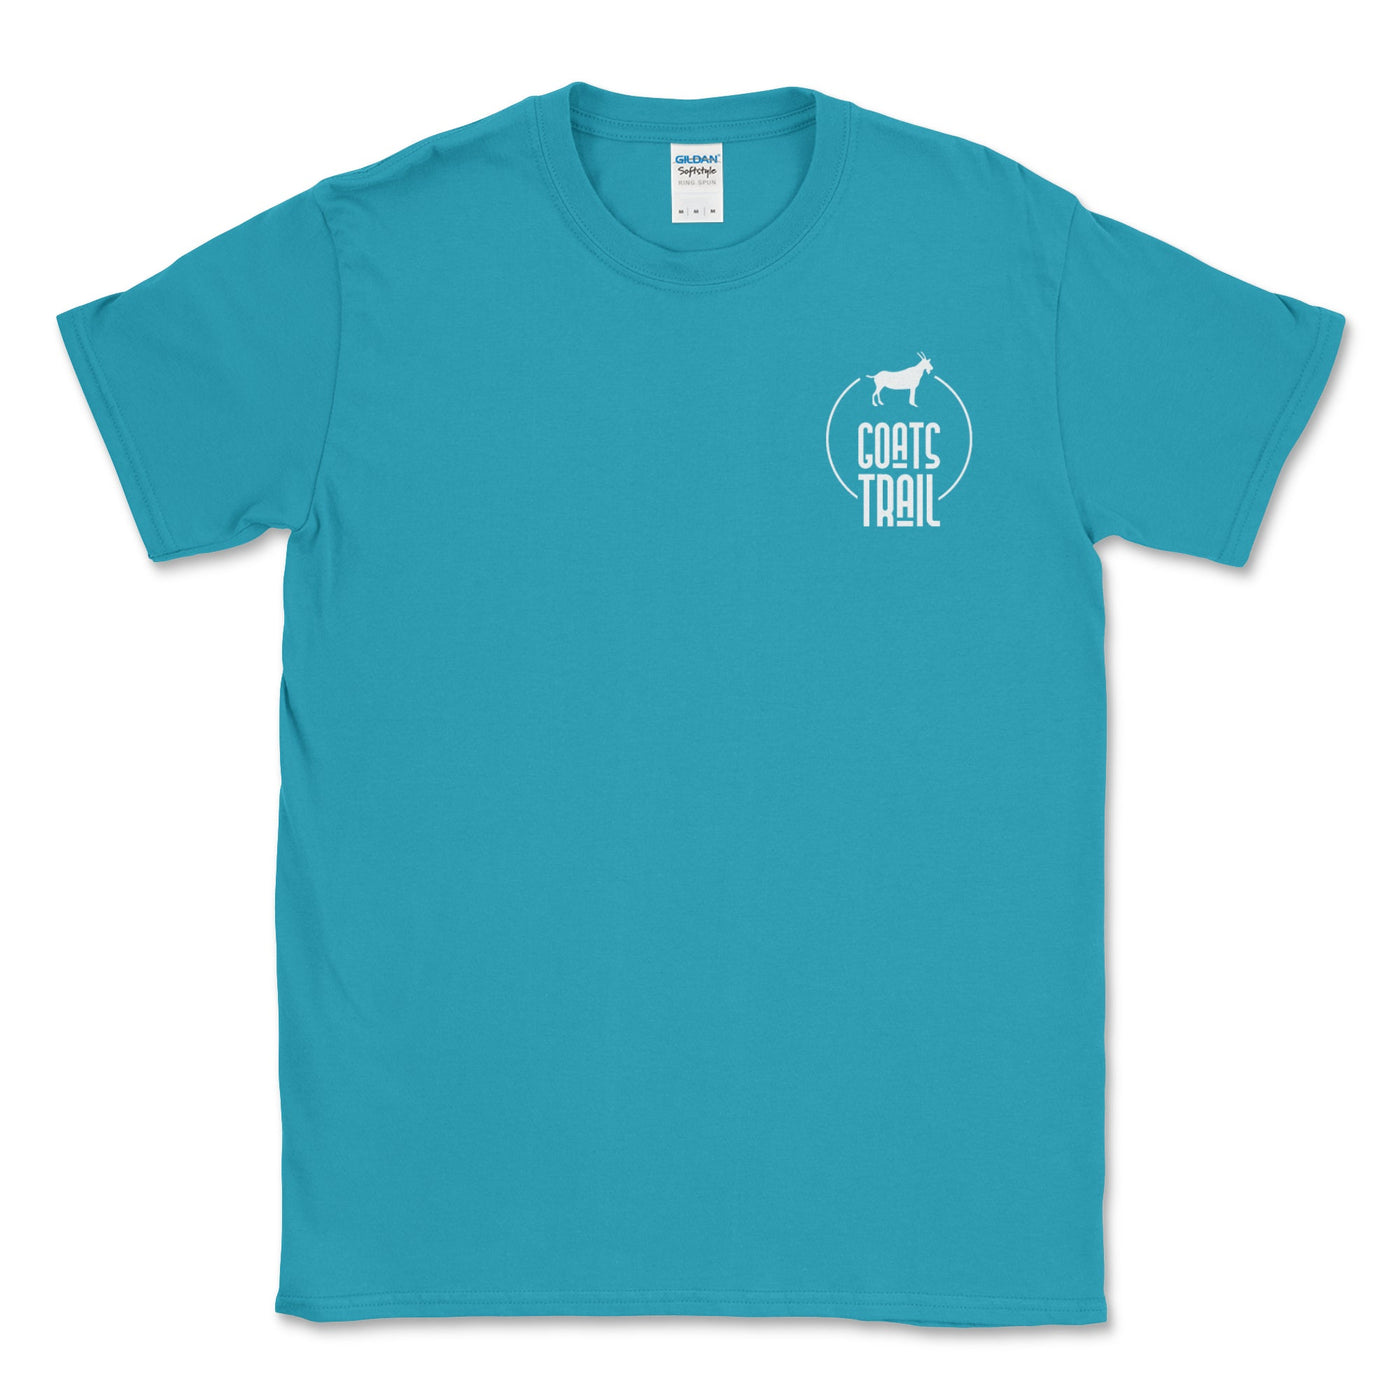 Go Outside, Stay Outside Offroad Graphic Tee - Goats Trail Off-Road Apparel Company